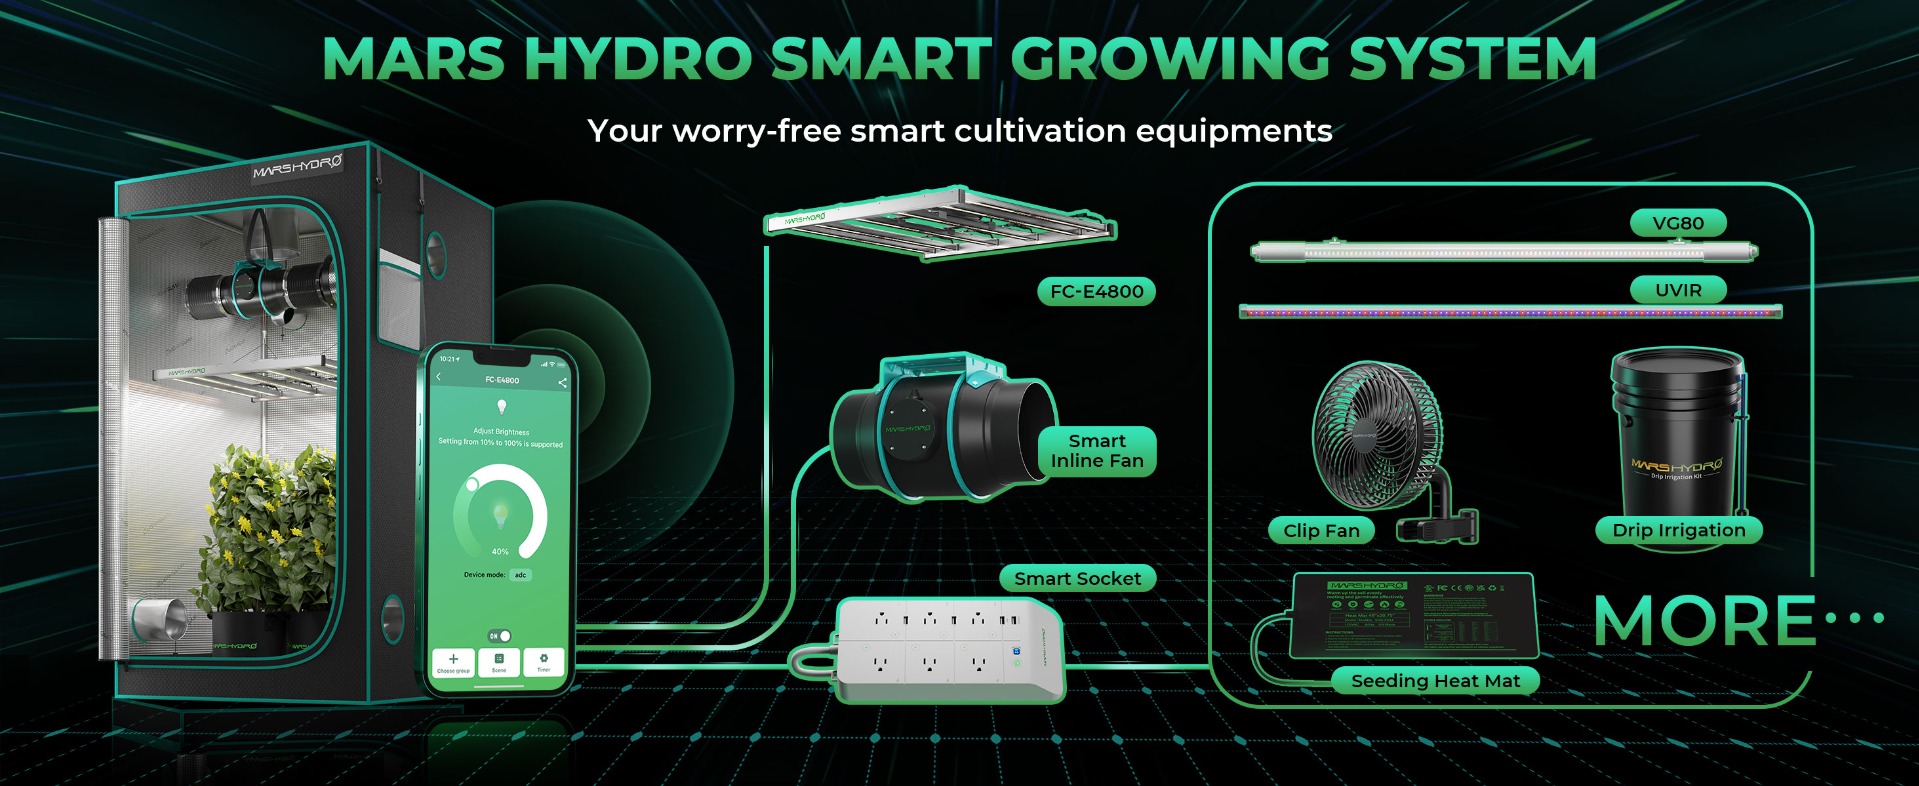 mars hydro smart growing system with fc-e4800 led grow light